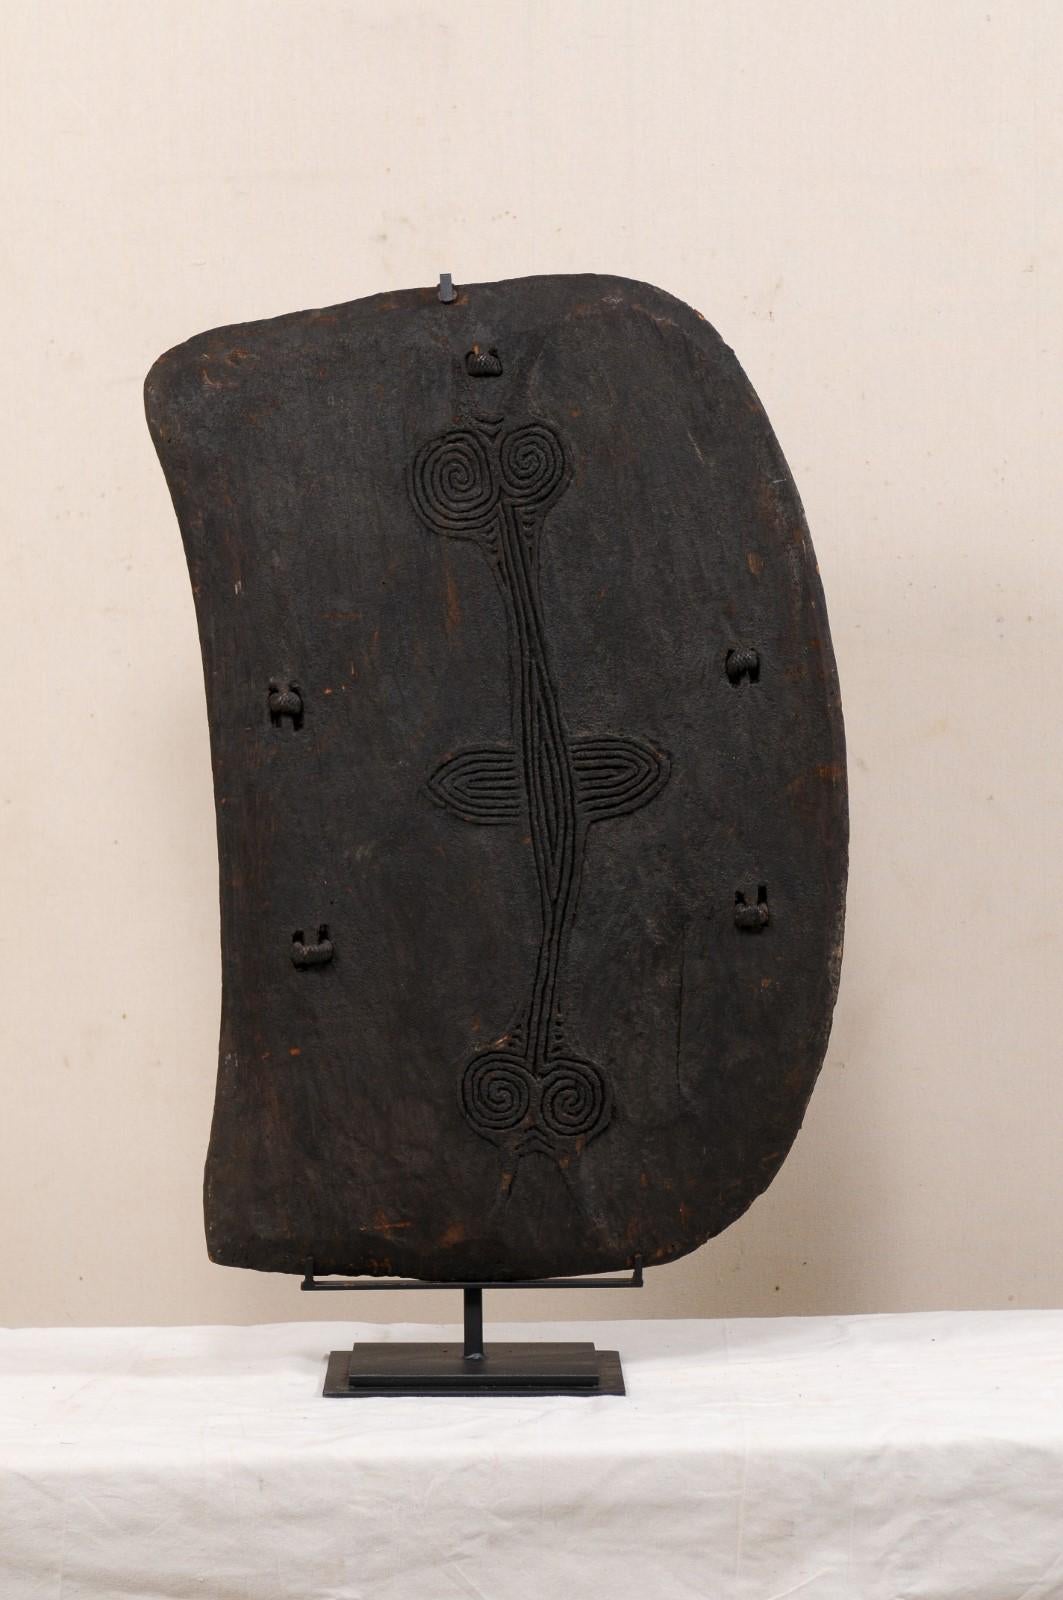 A Papua New Guinea carved-wood Lumi shield from the mid-20th century. This vintage war shield from the West Sepik region, the northwestern most province of Papua New Guinea (now referred to as Sandaun Province), features the typical kidney-shaped